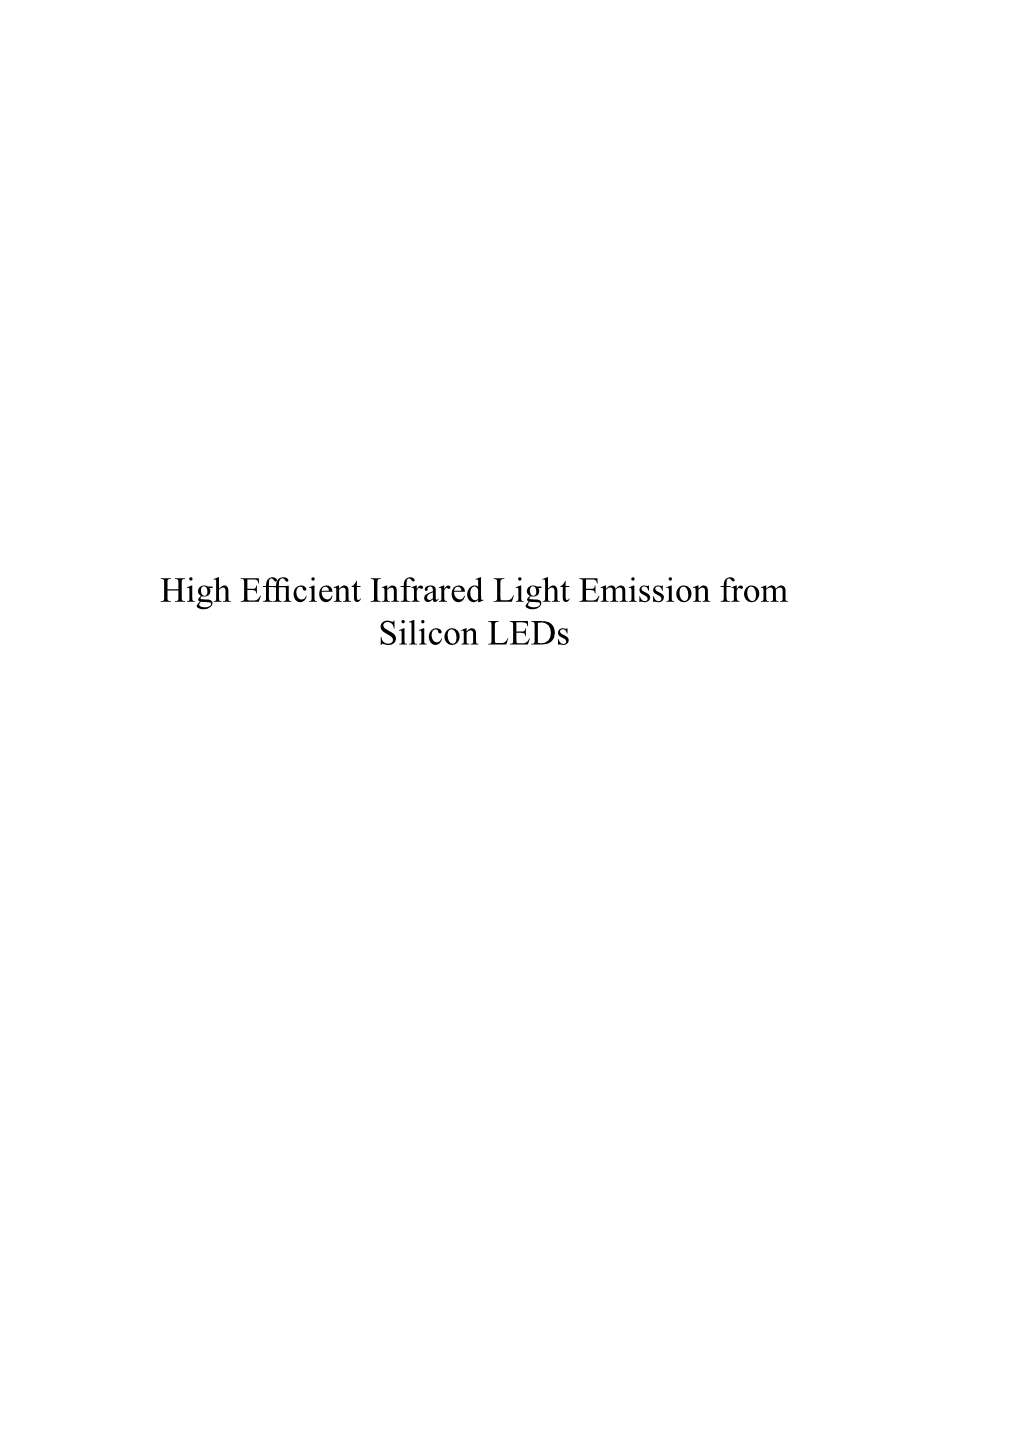 High Efficient Infrared Light Emission from Silicon Leds